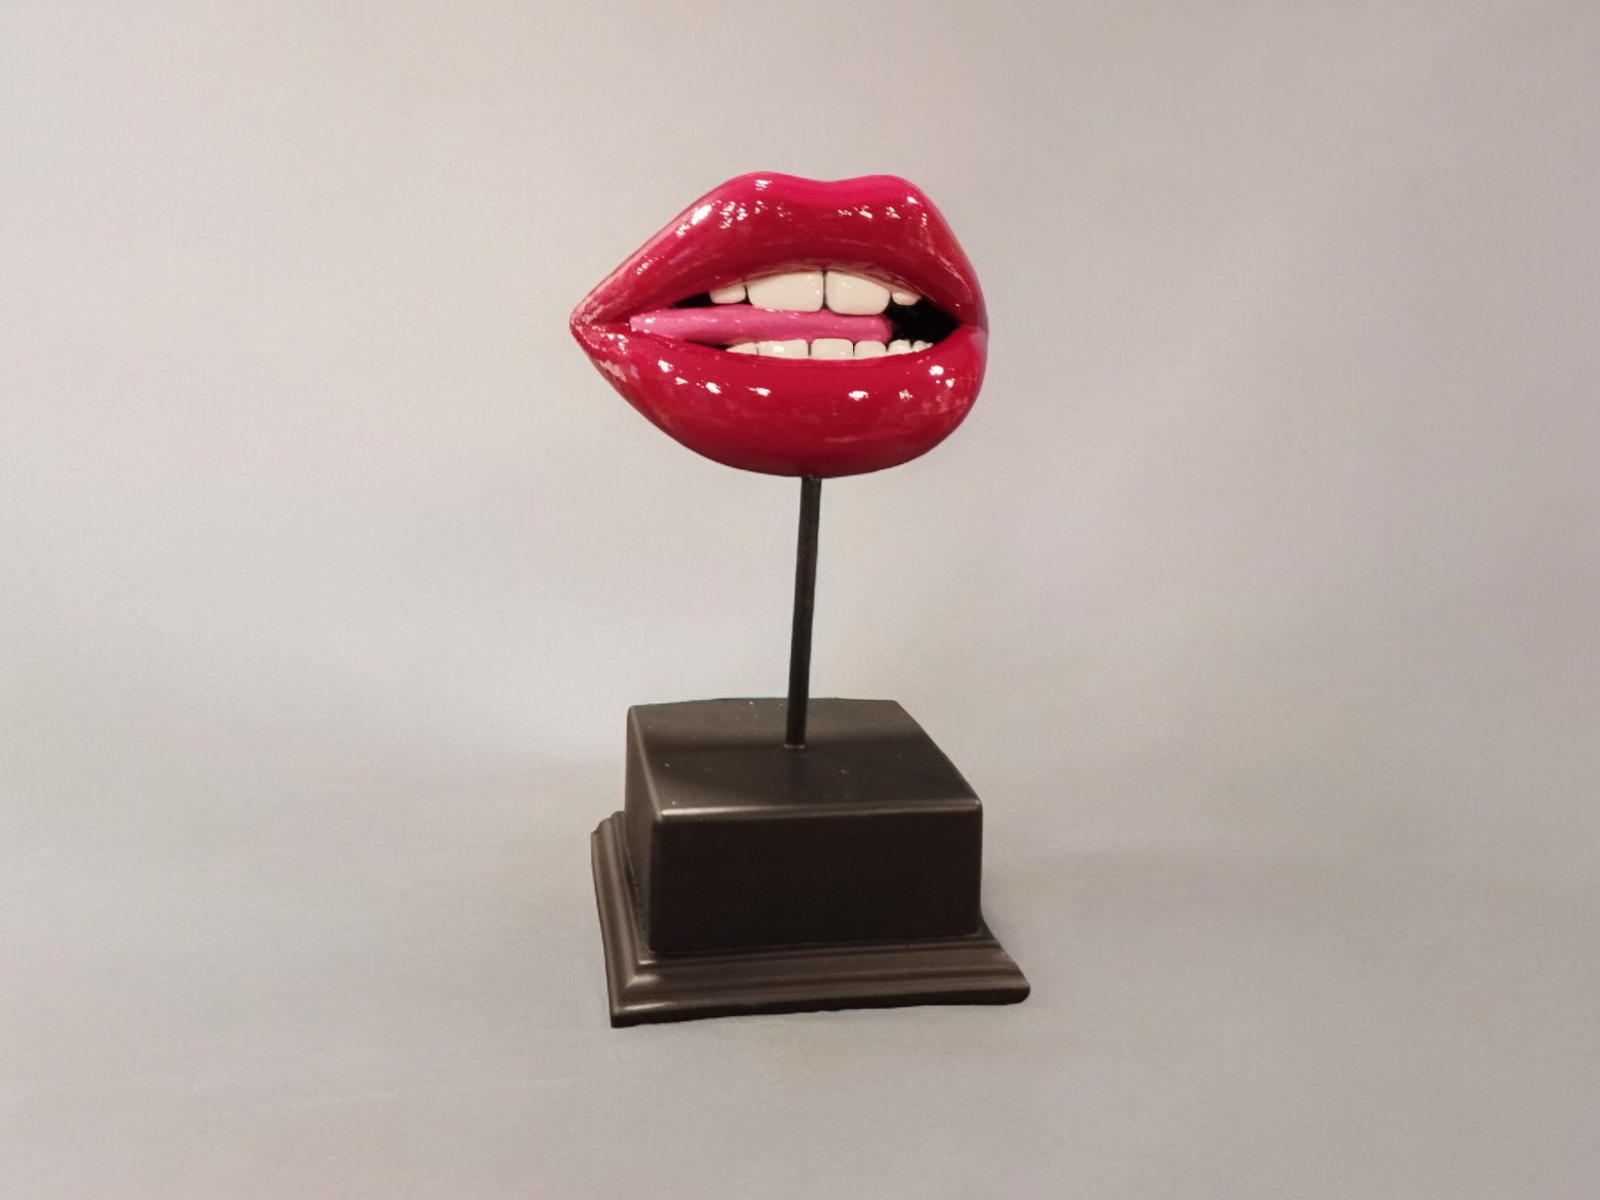 Sexy Red Lip statue Aesthetic Hot Desk Table Decor Gift For her Office Home